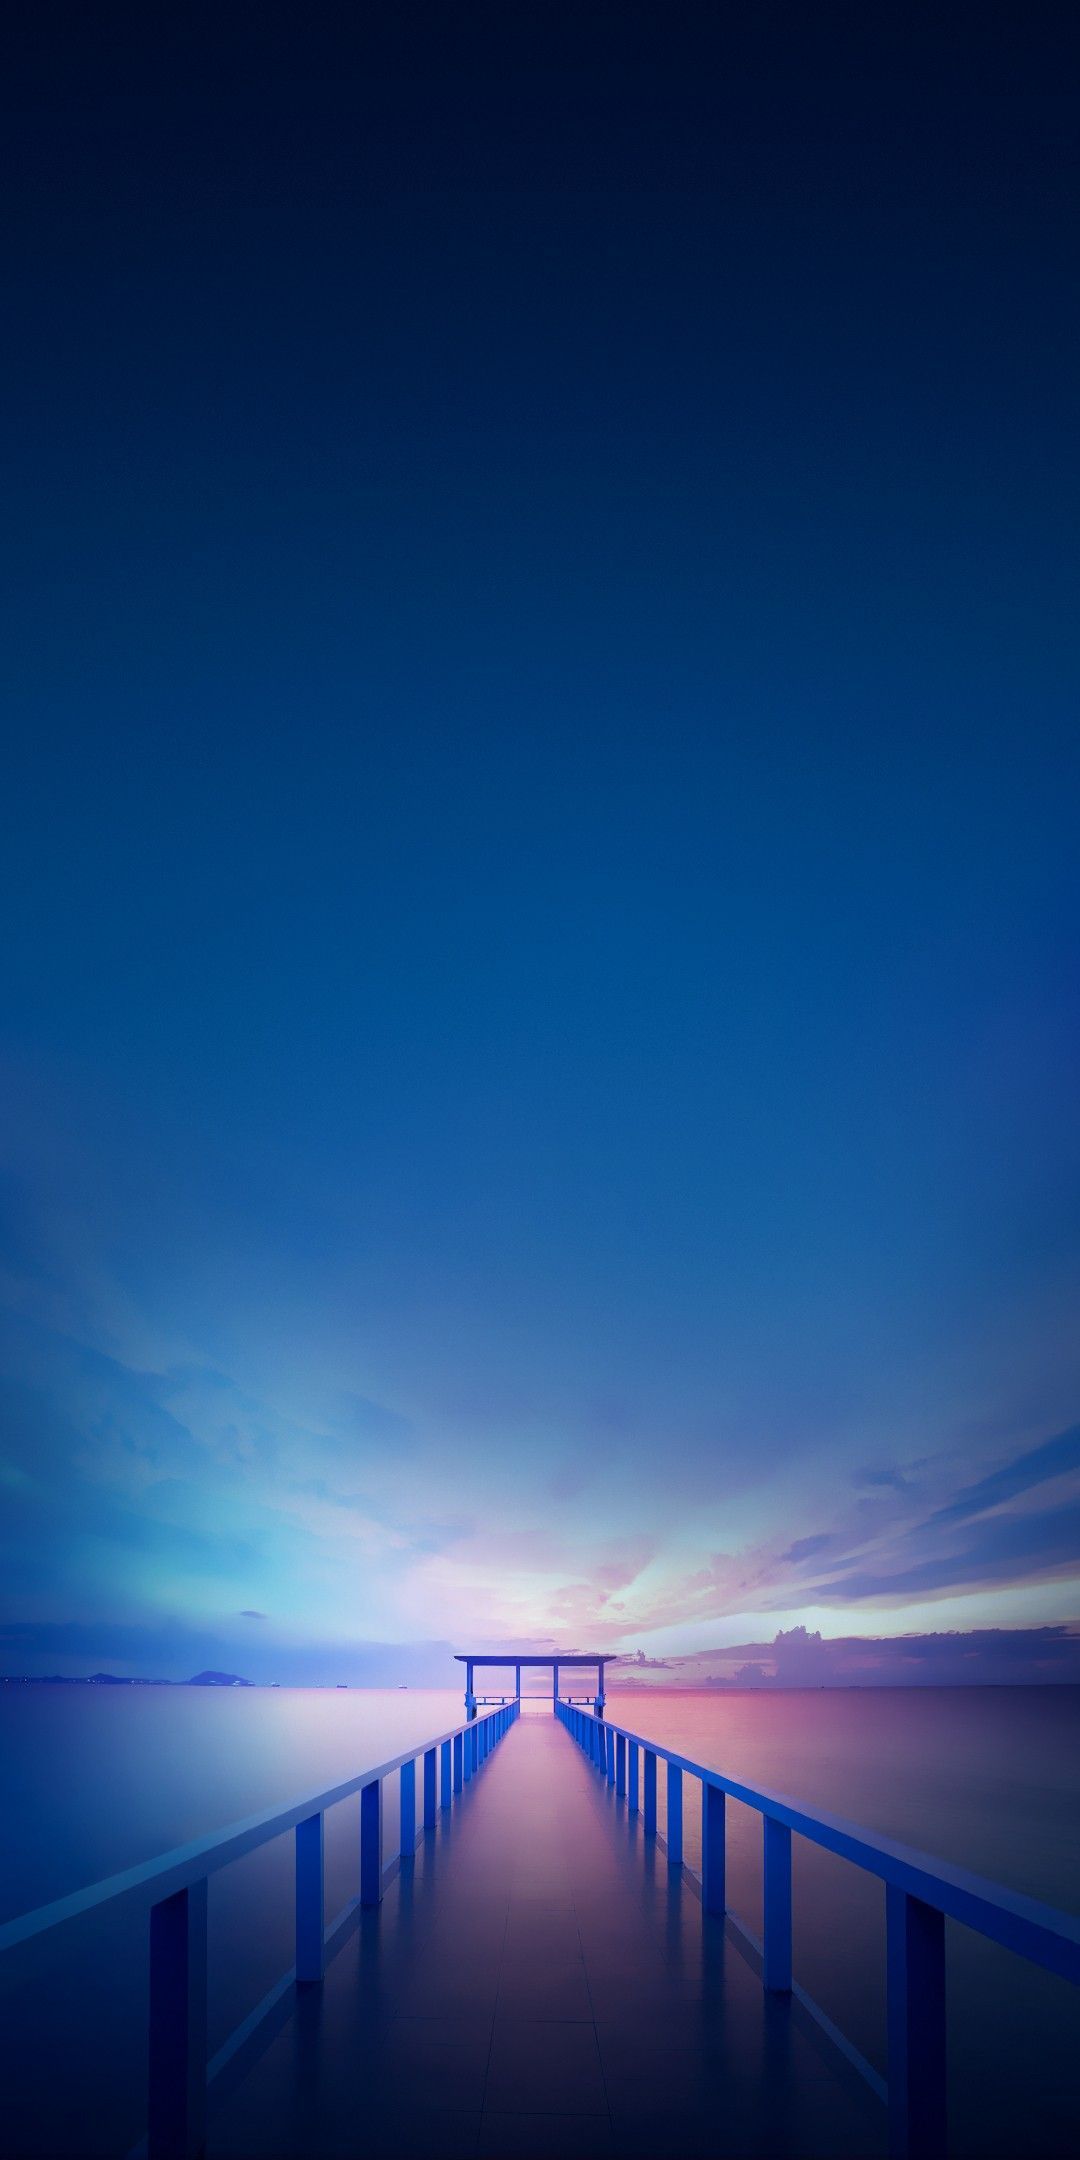 ✓[85+] Vivo X20 Stock Wallpaper 01 - #blue #calm #loveandlight - Android /  iPhone HD Wallpaper Background Download (png / jpg) (2023)